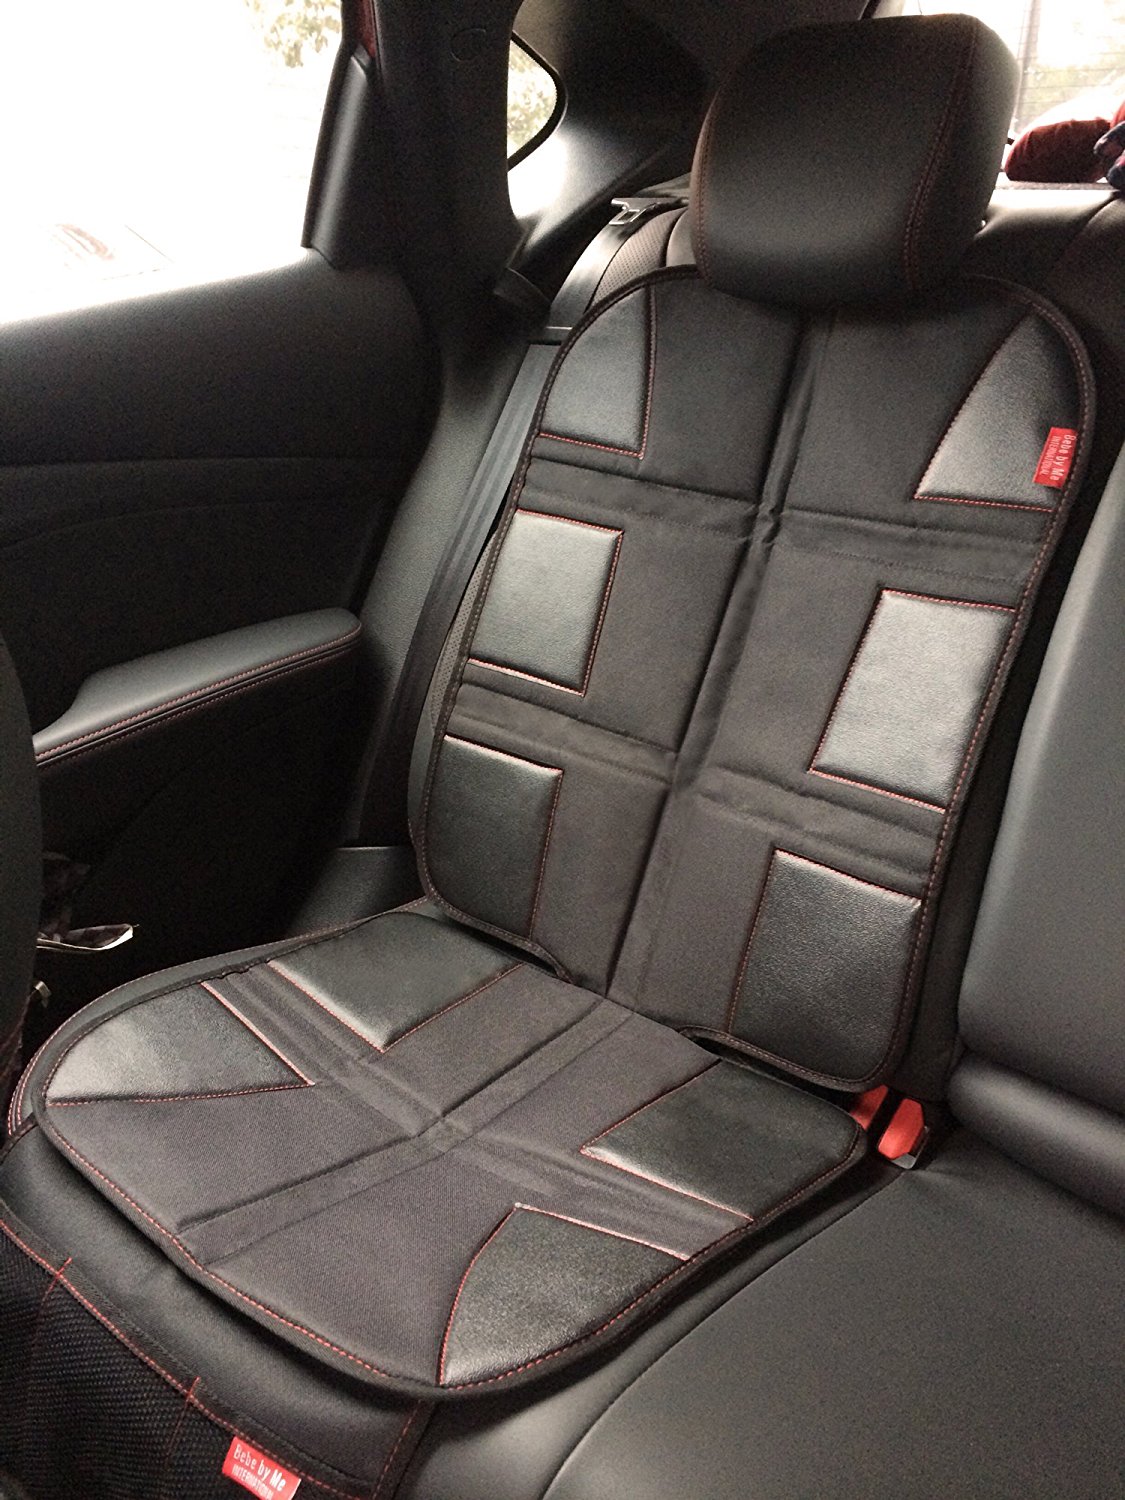 Baby Car Seat Protector advice for ISF - ClubLexus - Lexus Forum Discussion